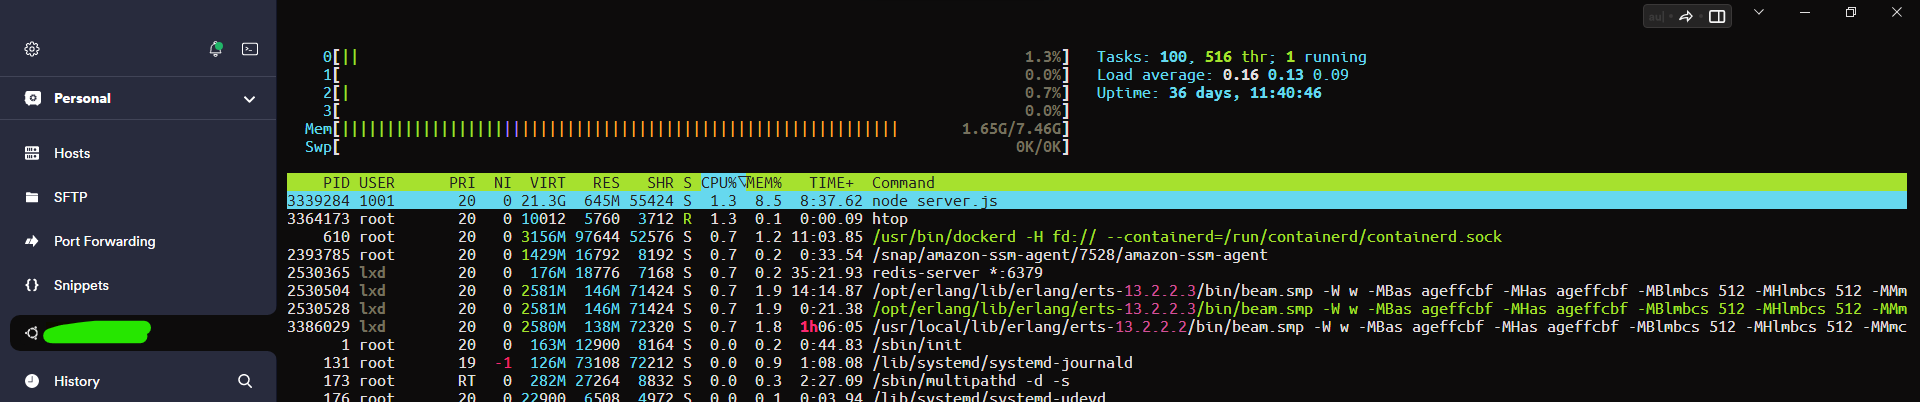 htop command output